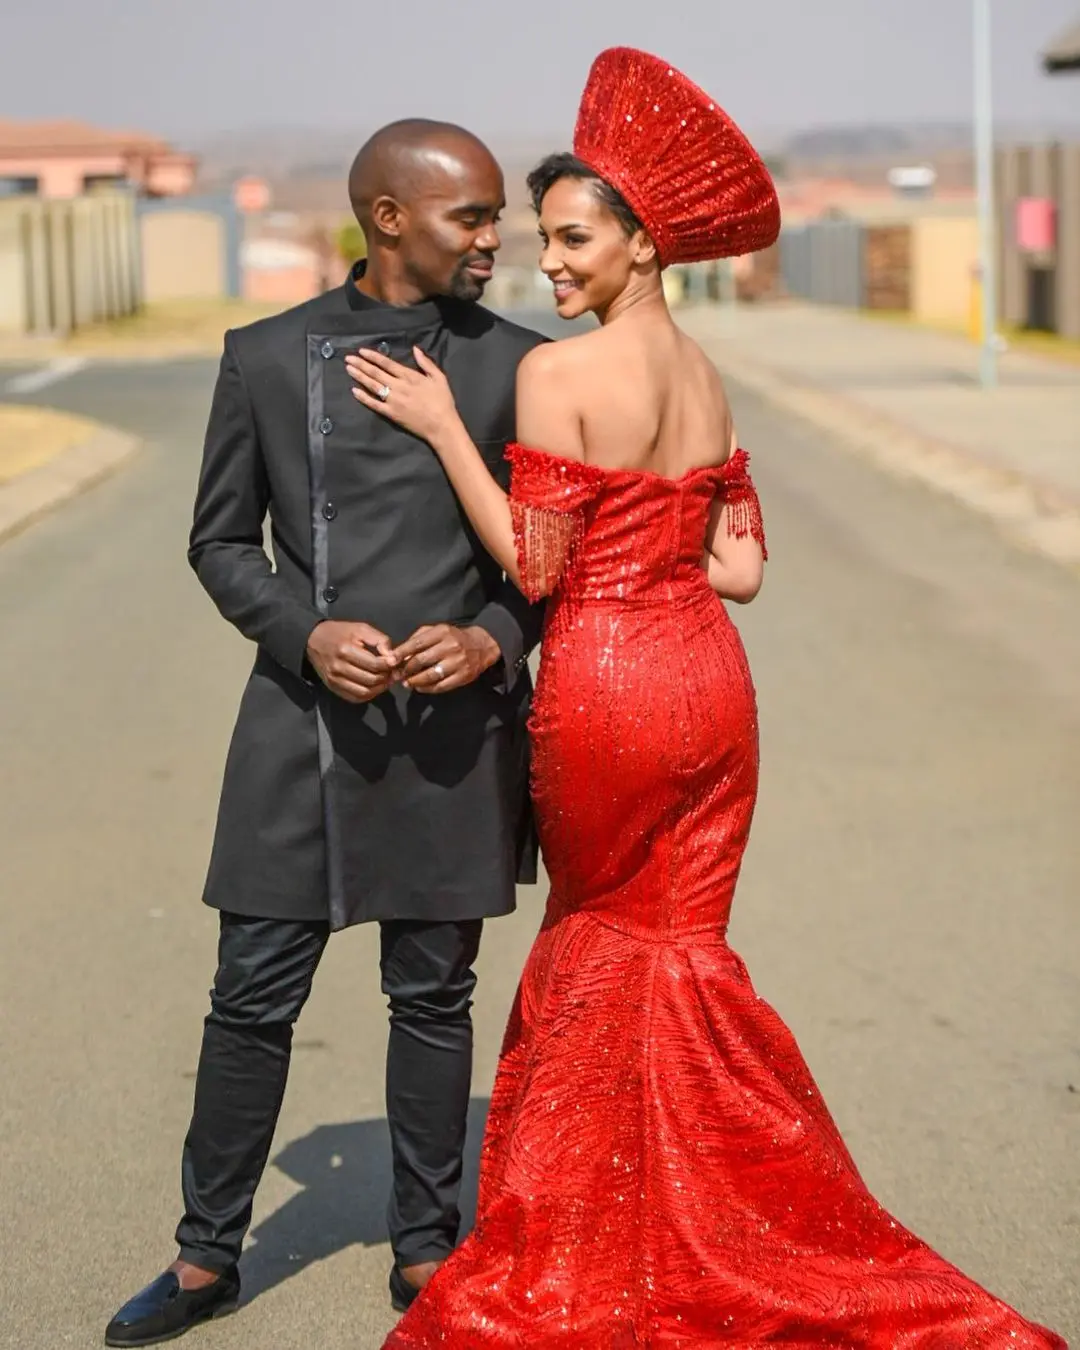 Dr Musa Mthombeni and wife, Liesl Laurie give trolls a cold shoulder